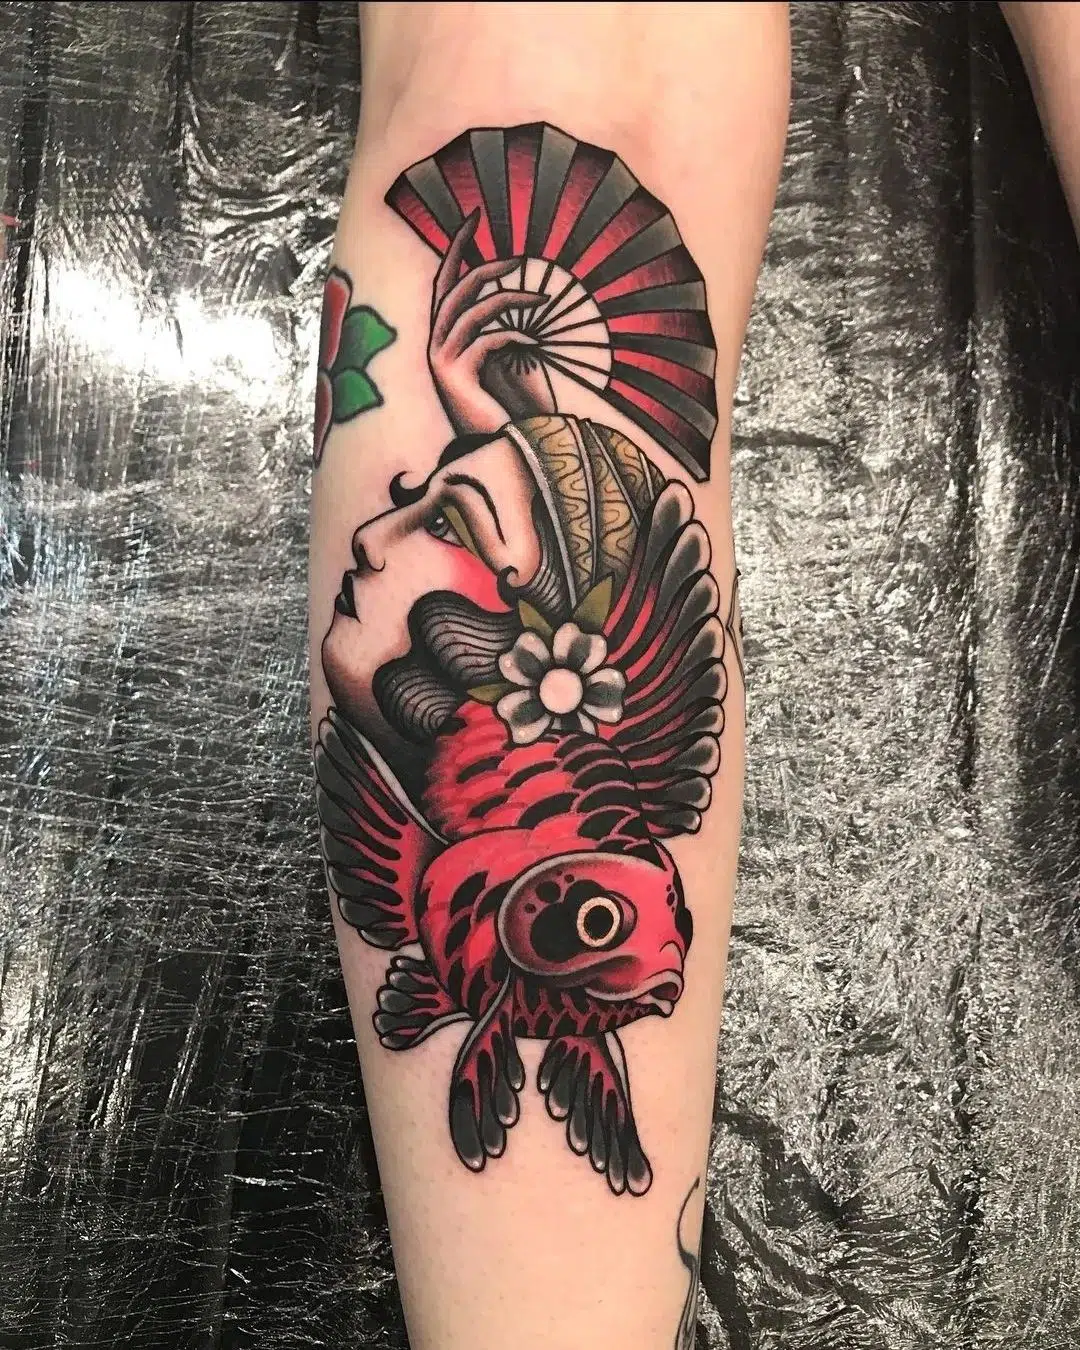 Goldfish tattoo , done by Andy dykes at timeless tradition, pinkston :  r/traditionaltattoos